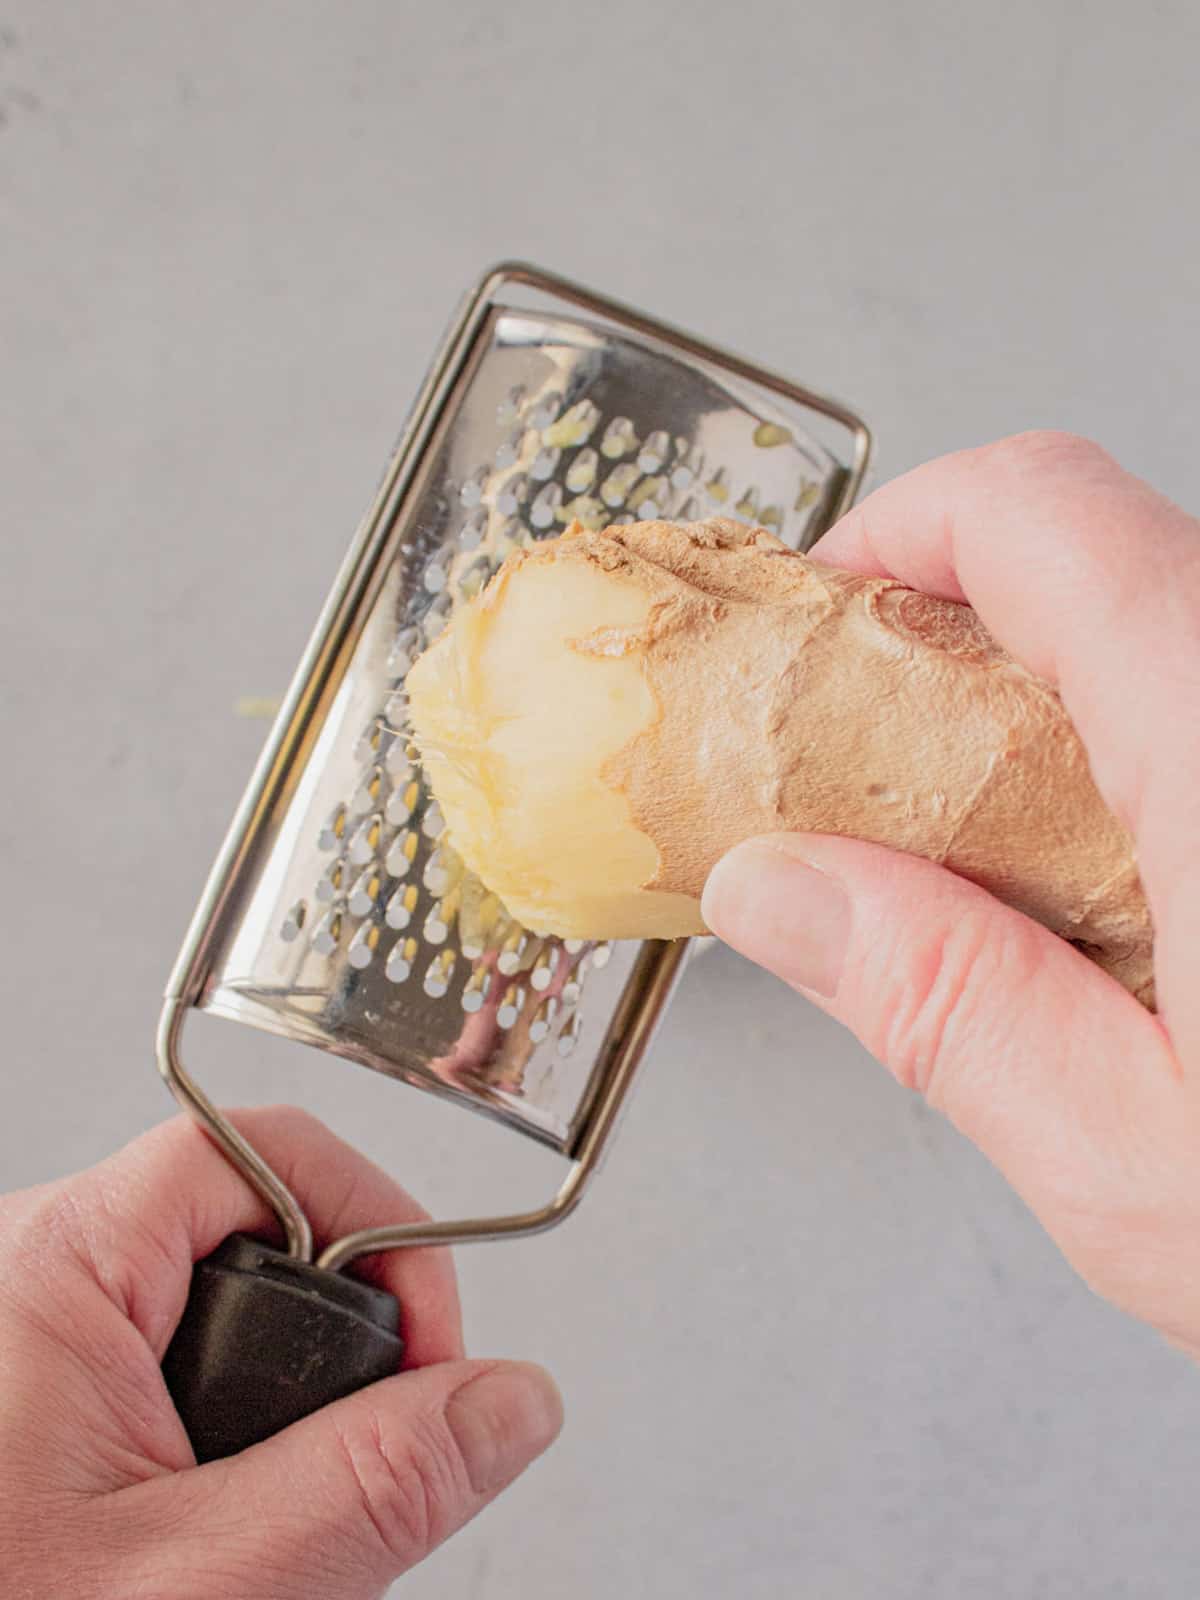 Grating ginger with a microplane.